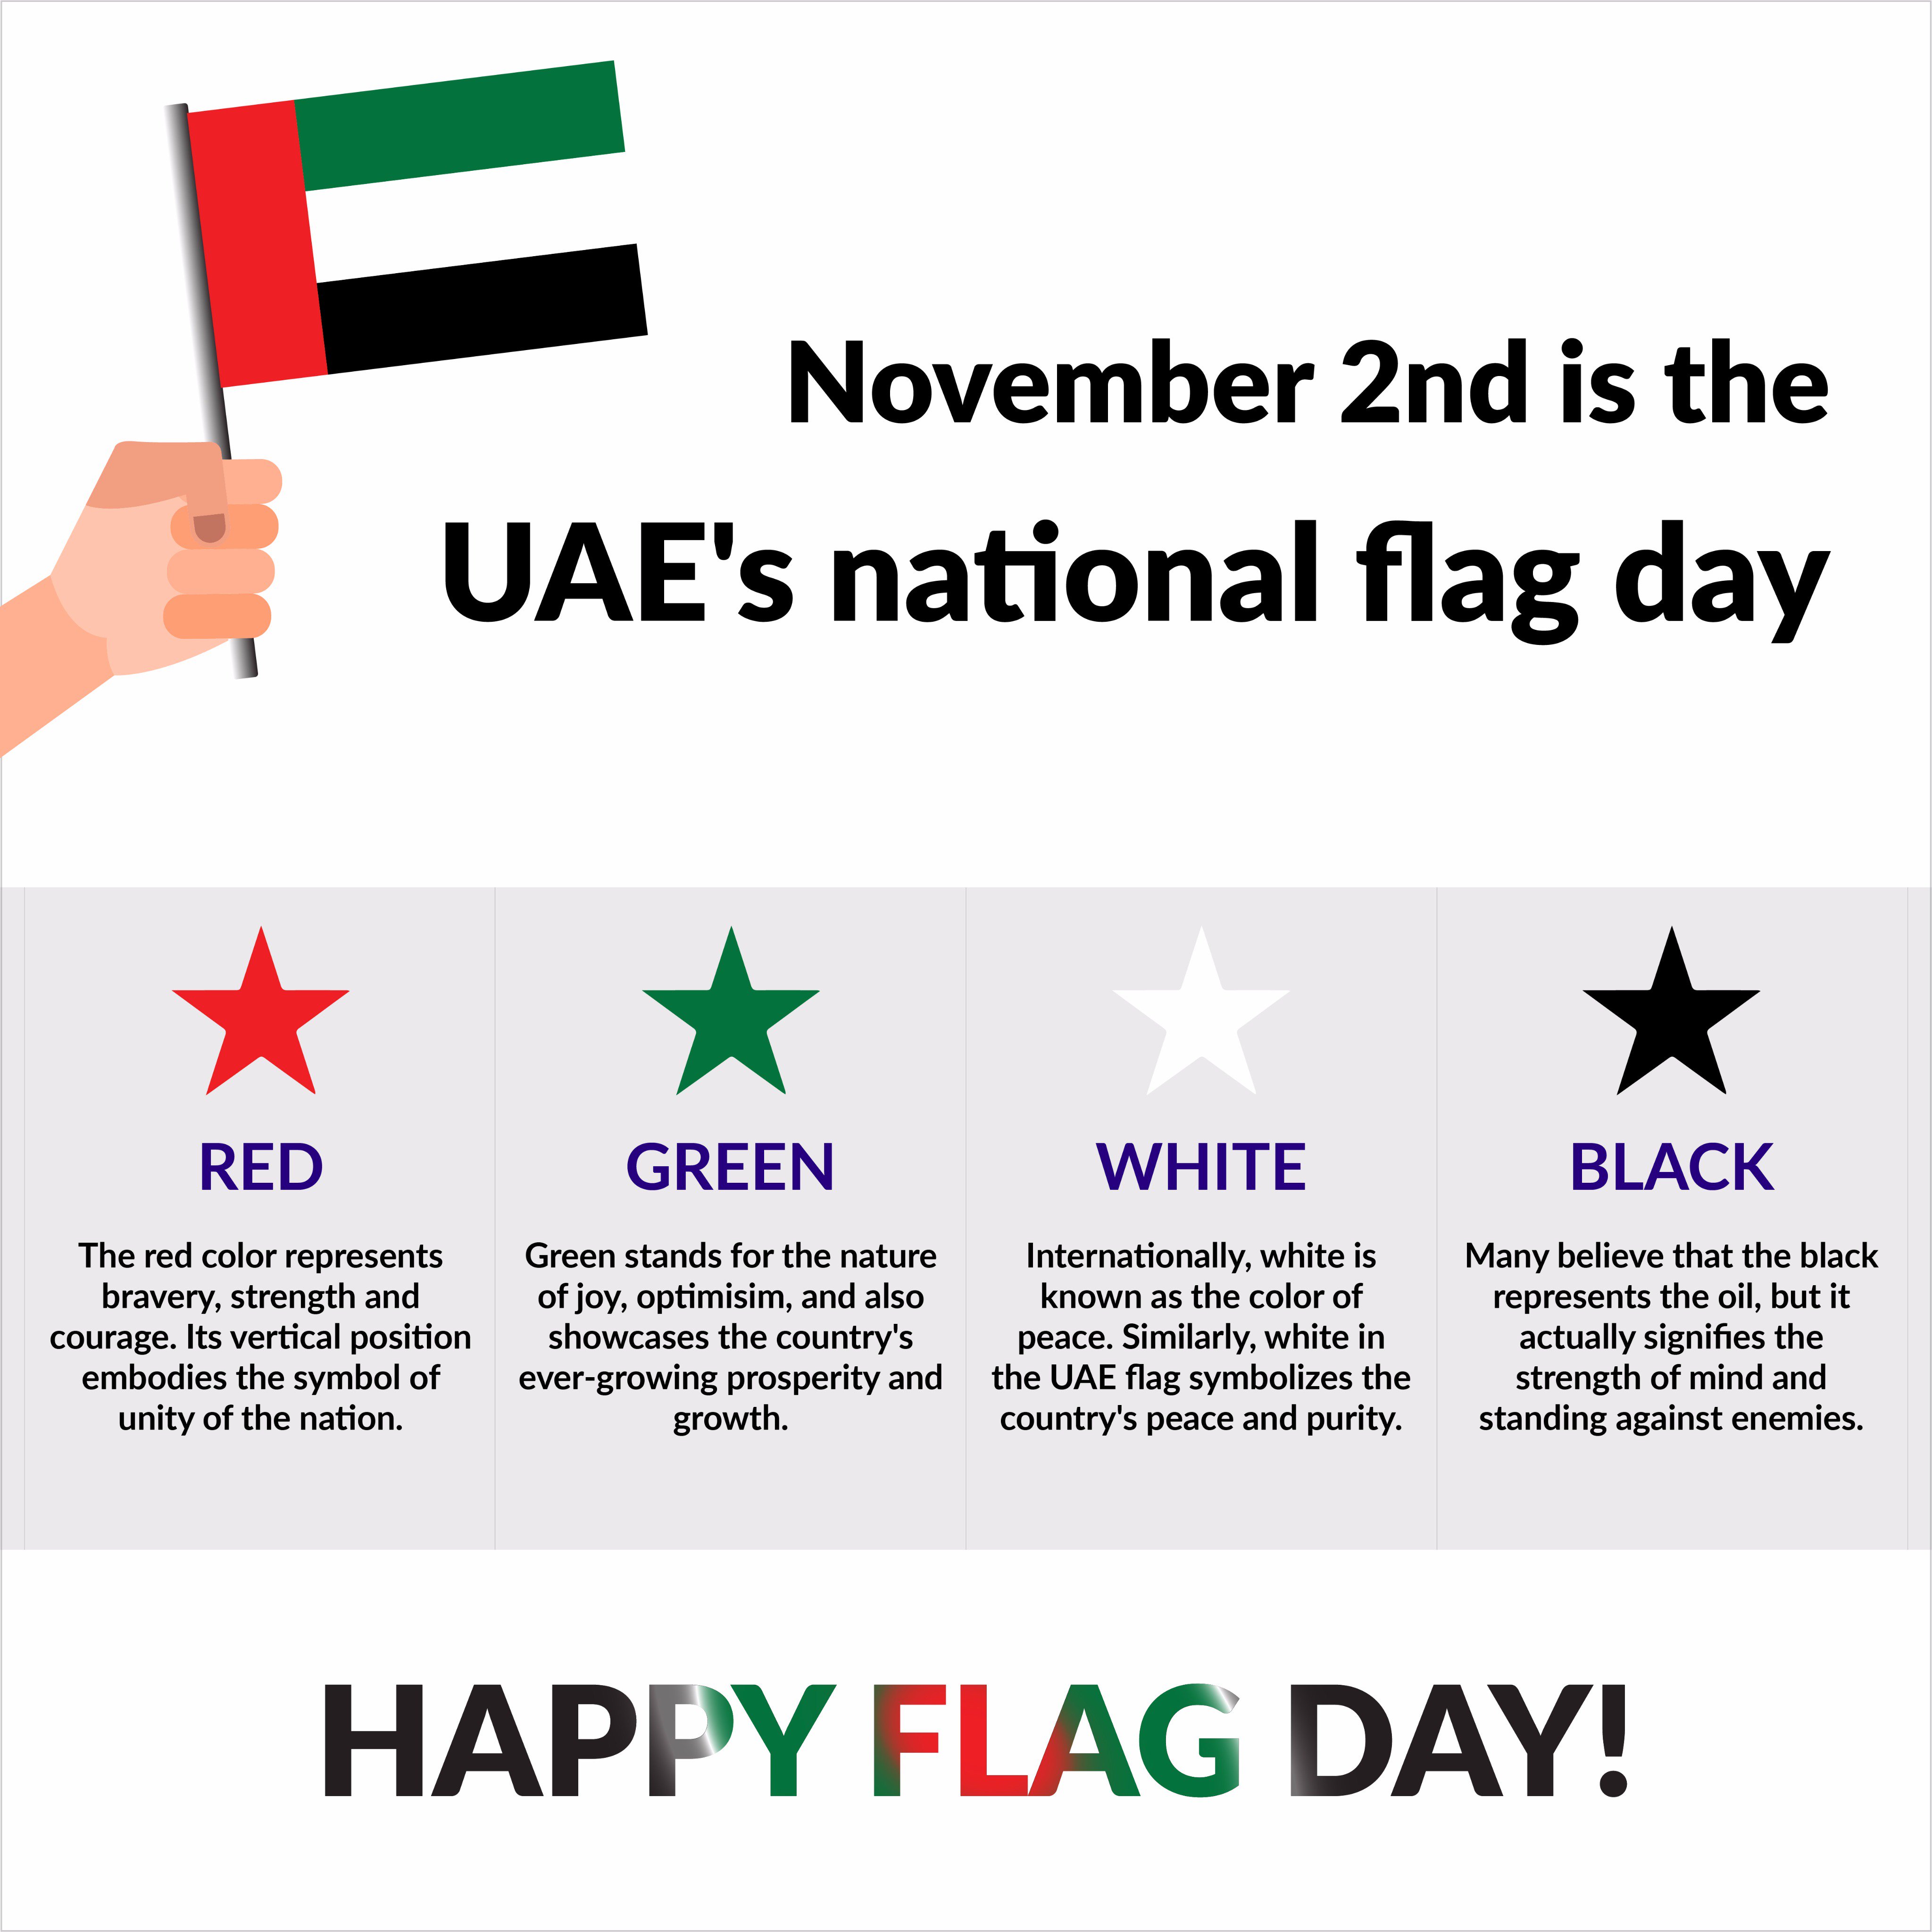 What do the colours on the flag represent